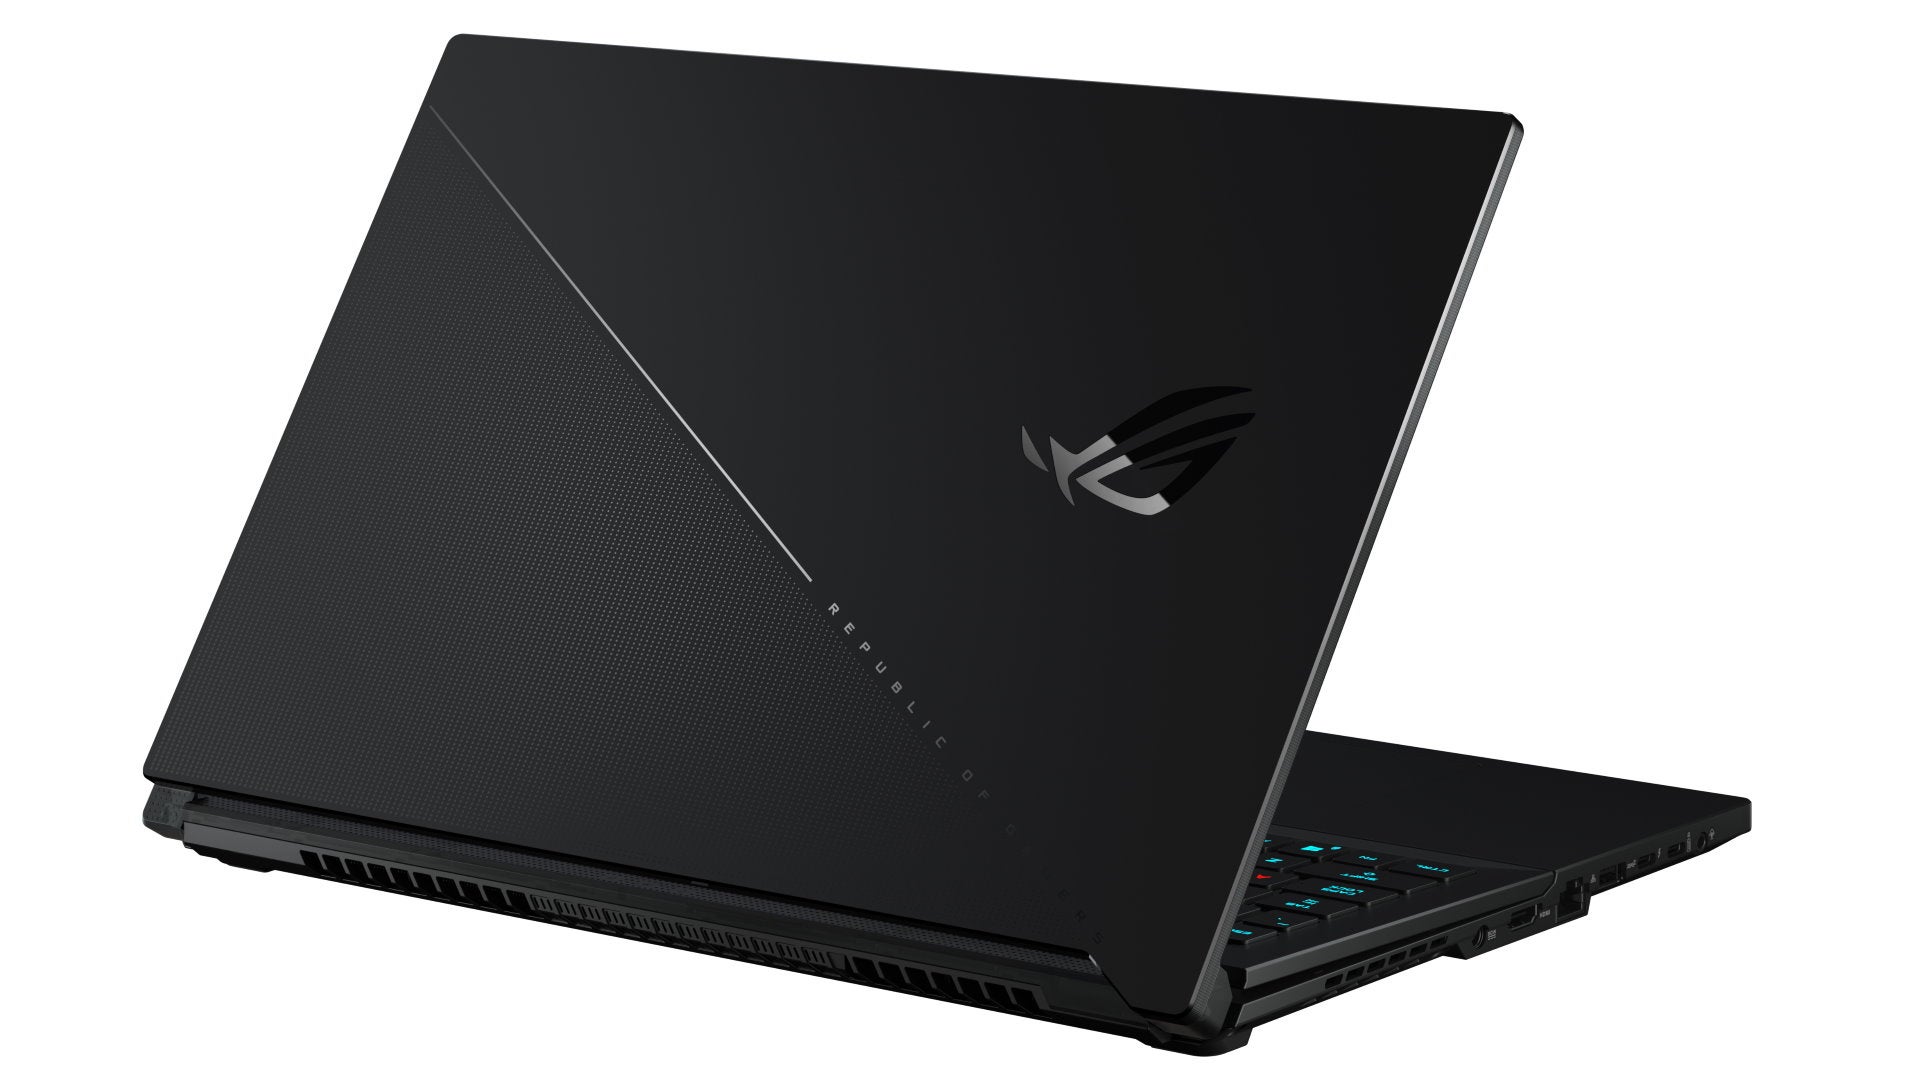 A photo of the Asus ROG Zephyrus S17 gaming laptop